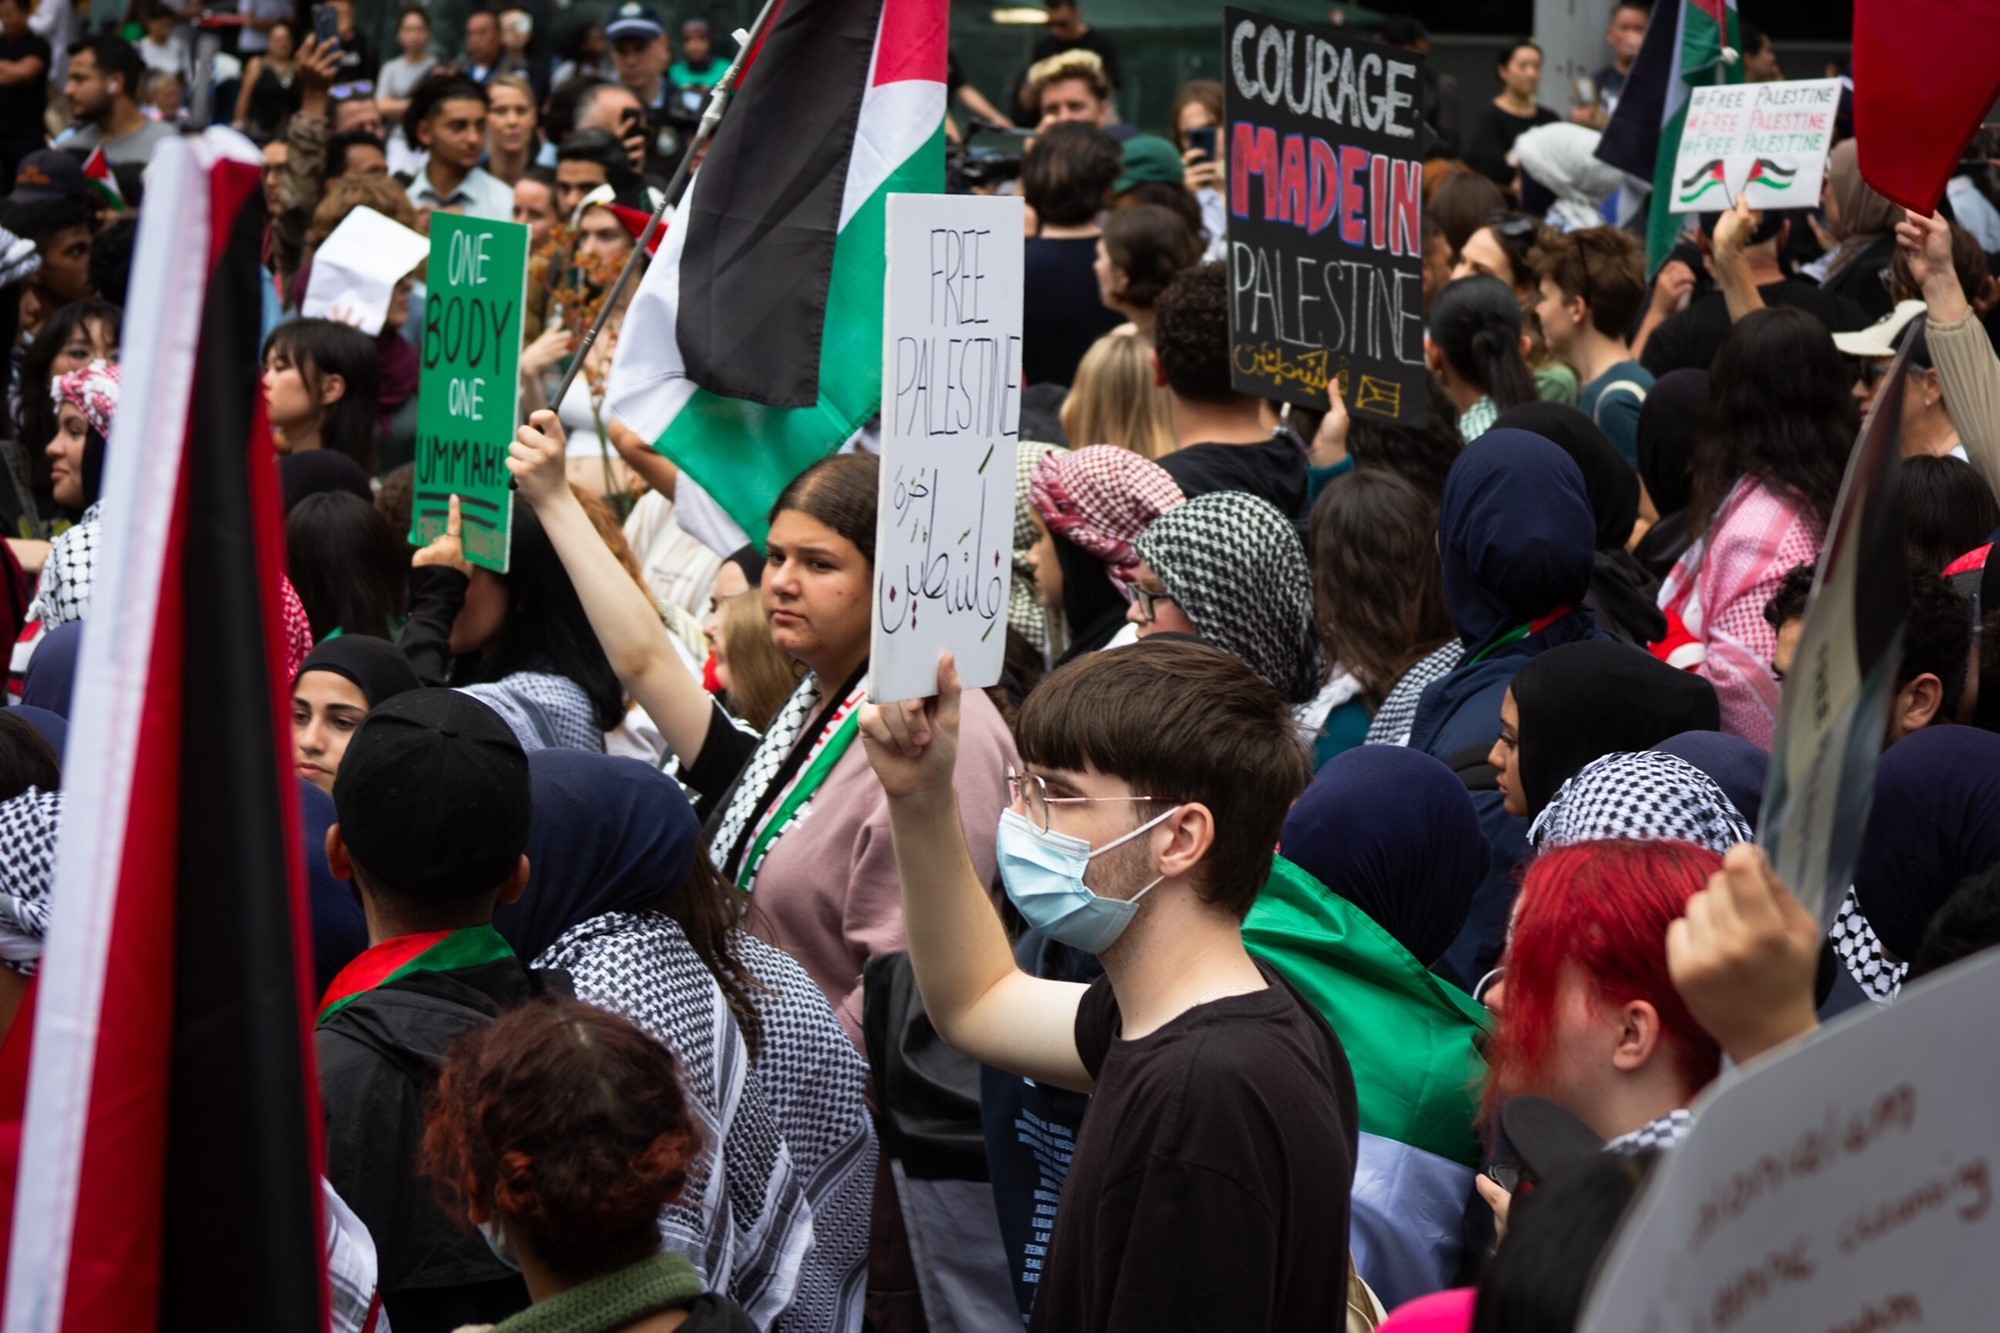 Image of a pro-Palestinian demonstration, people holding flags and signs.